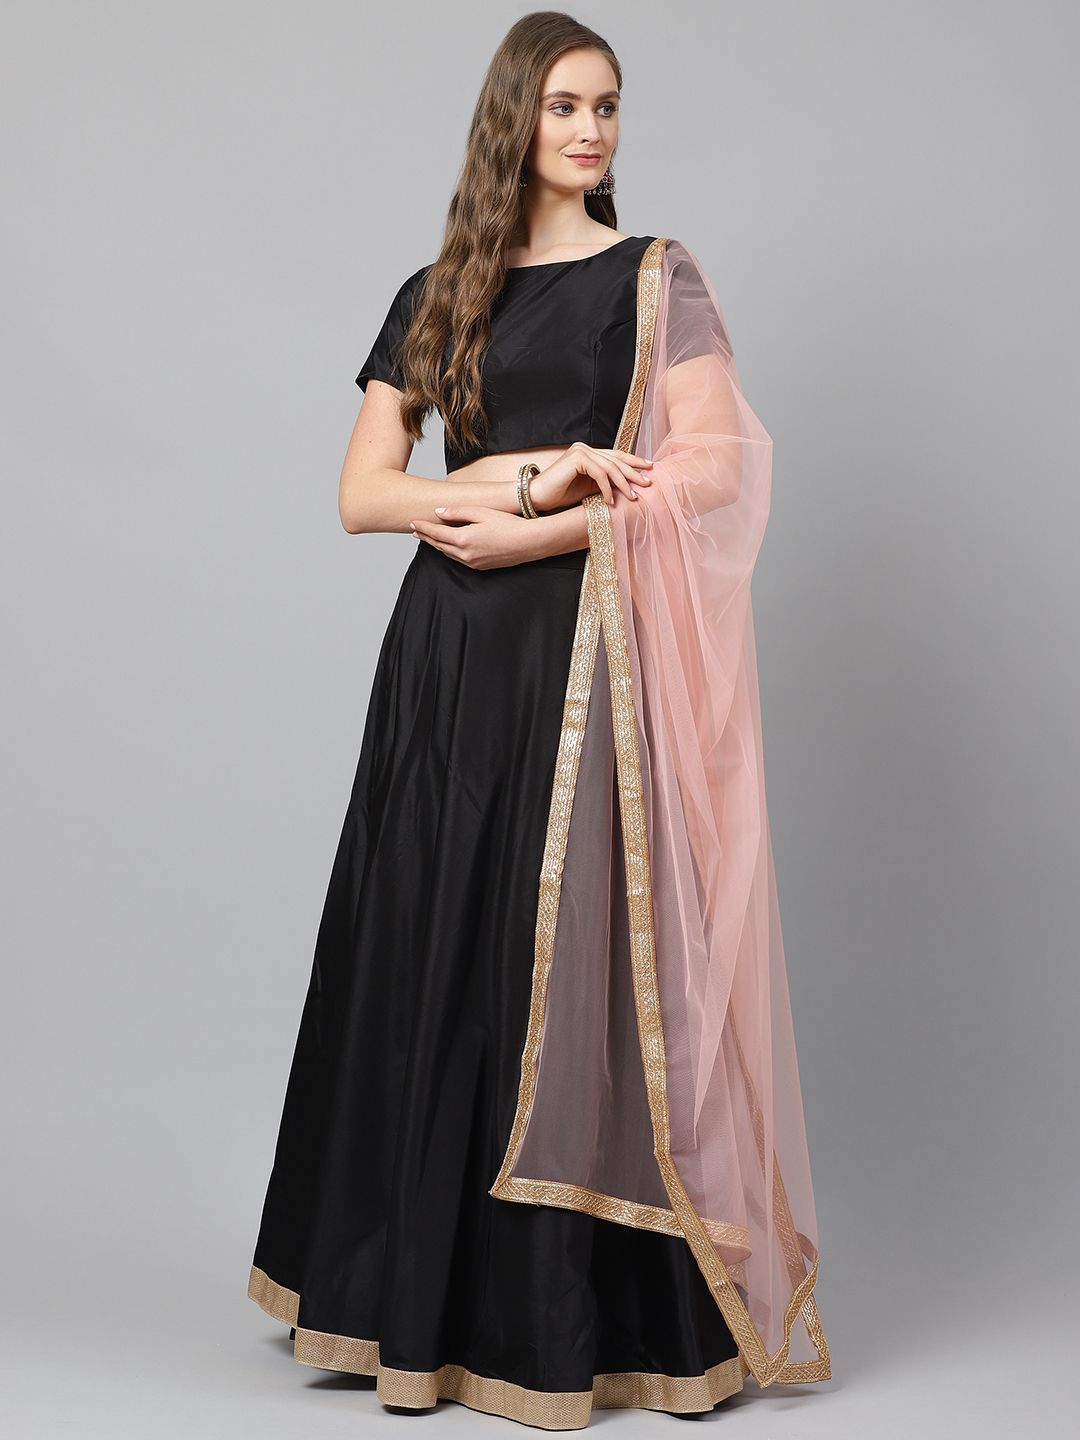 Readiprint Fashions Black & Pink Solid Semi-Stitched Lehenga & Unstitched Blouse with Dupatta Price in India